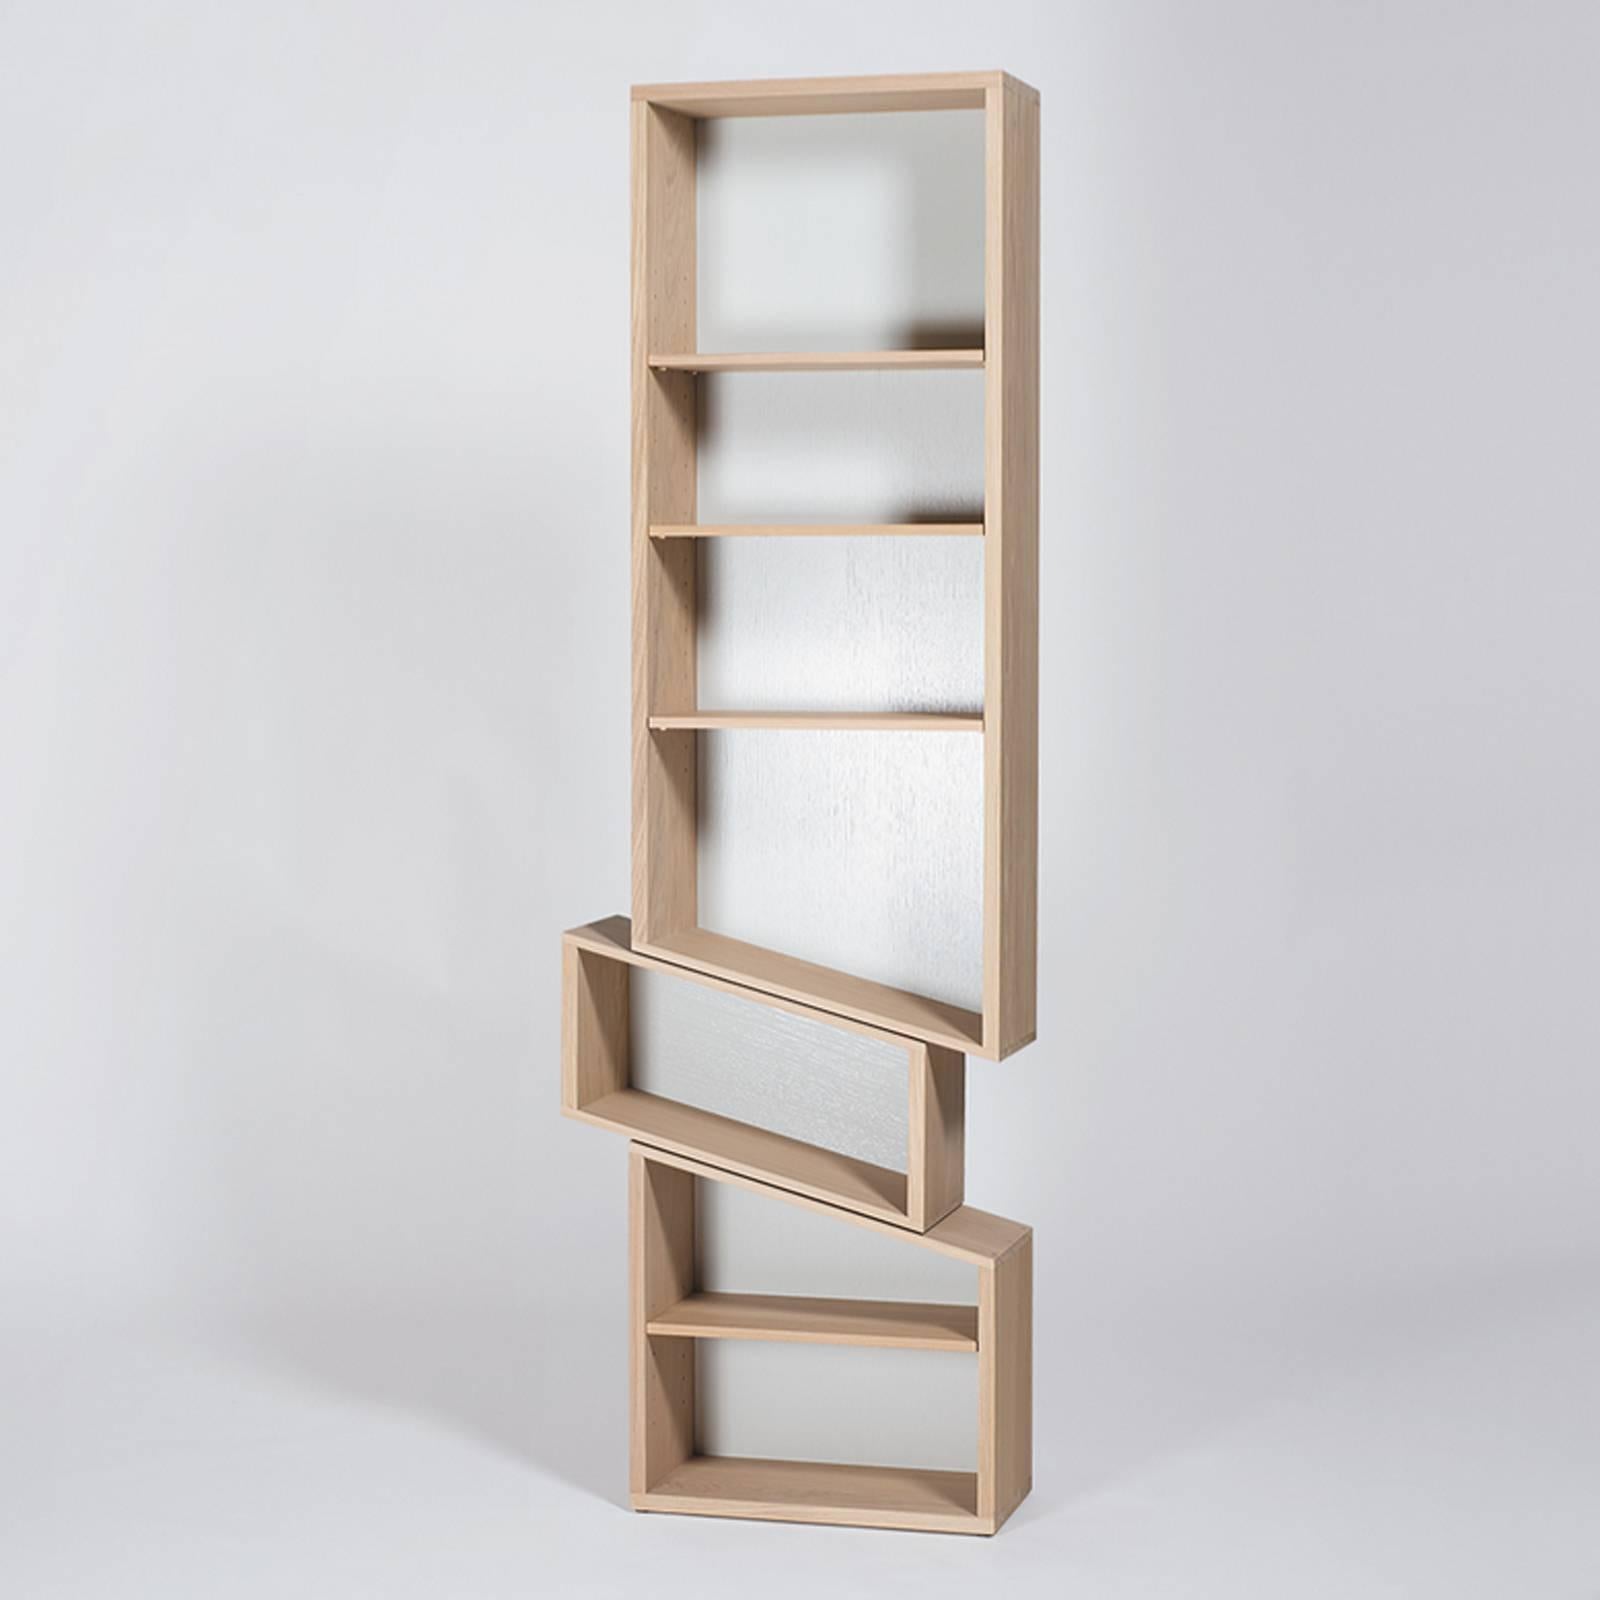 Shelve sliding 100% solid French raw oak, from sustainable
forests, France. With white backs. Back colors can be 
selected in different colors, on request. From Anjou in France.
Available in raw oak, price: 1850,00,00€
Available in varnished